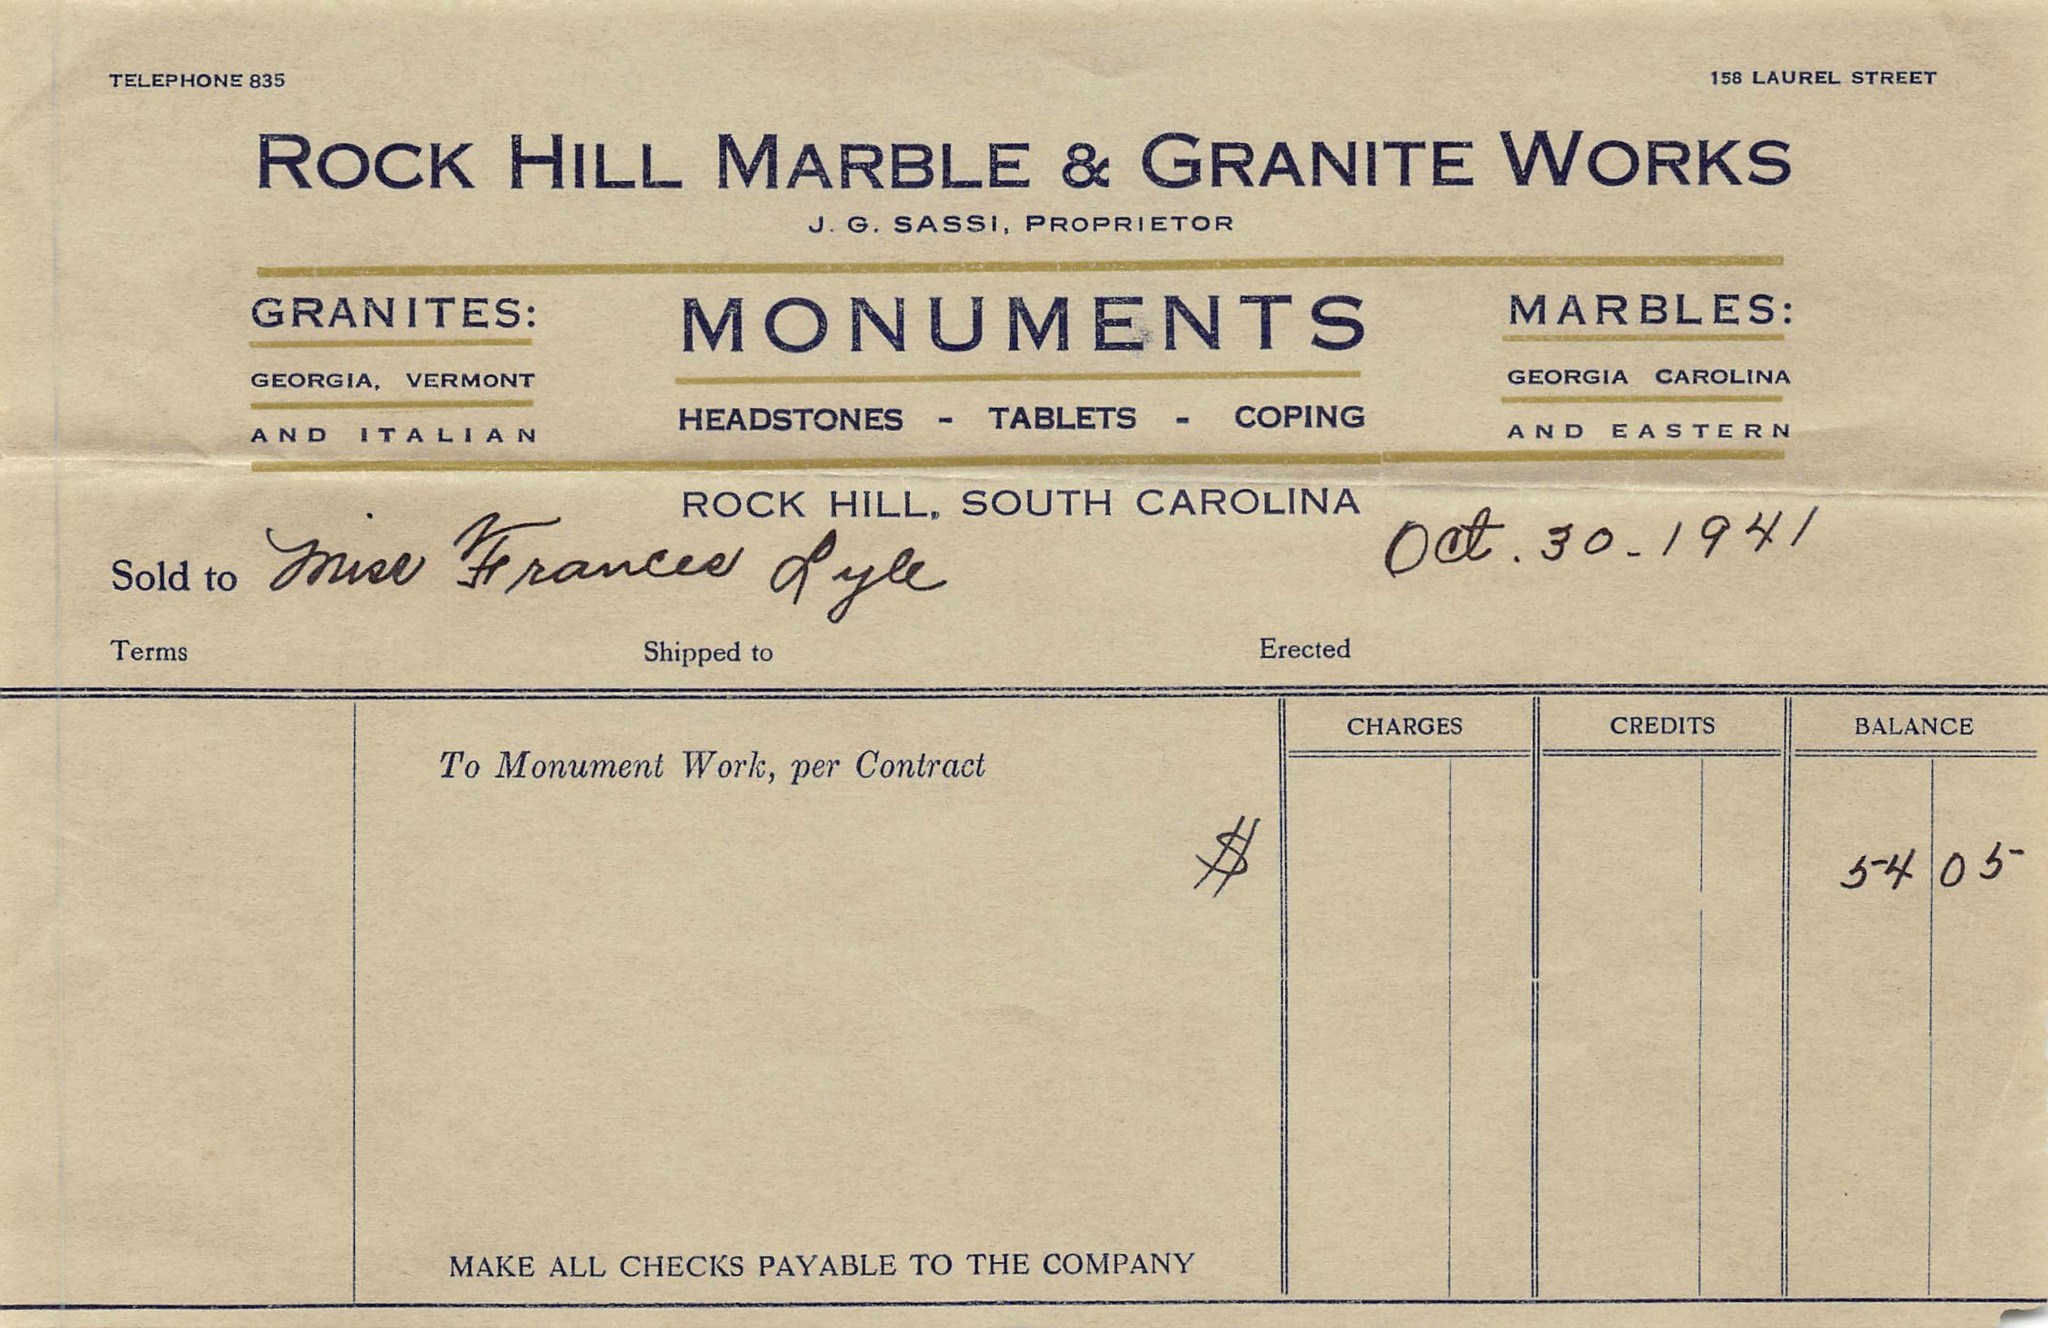 1941 RECEIPT FOR MONUMENT WORK - LYLIE (FENNELL COLLECTION 2021)